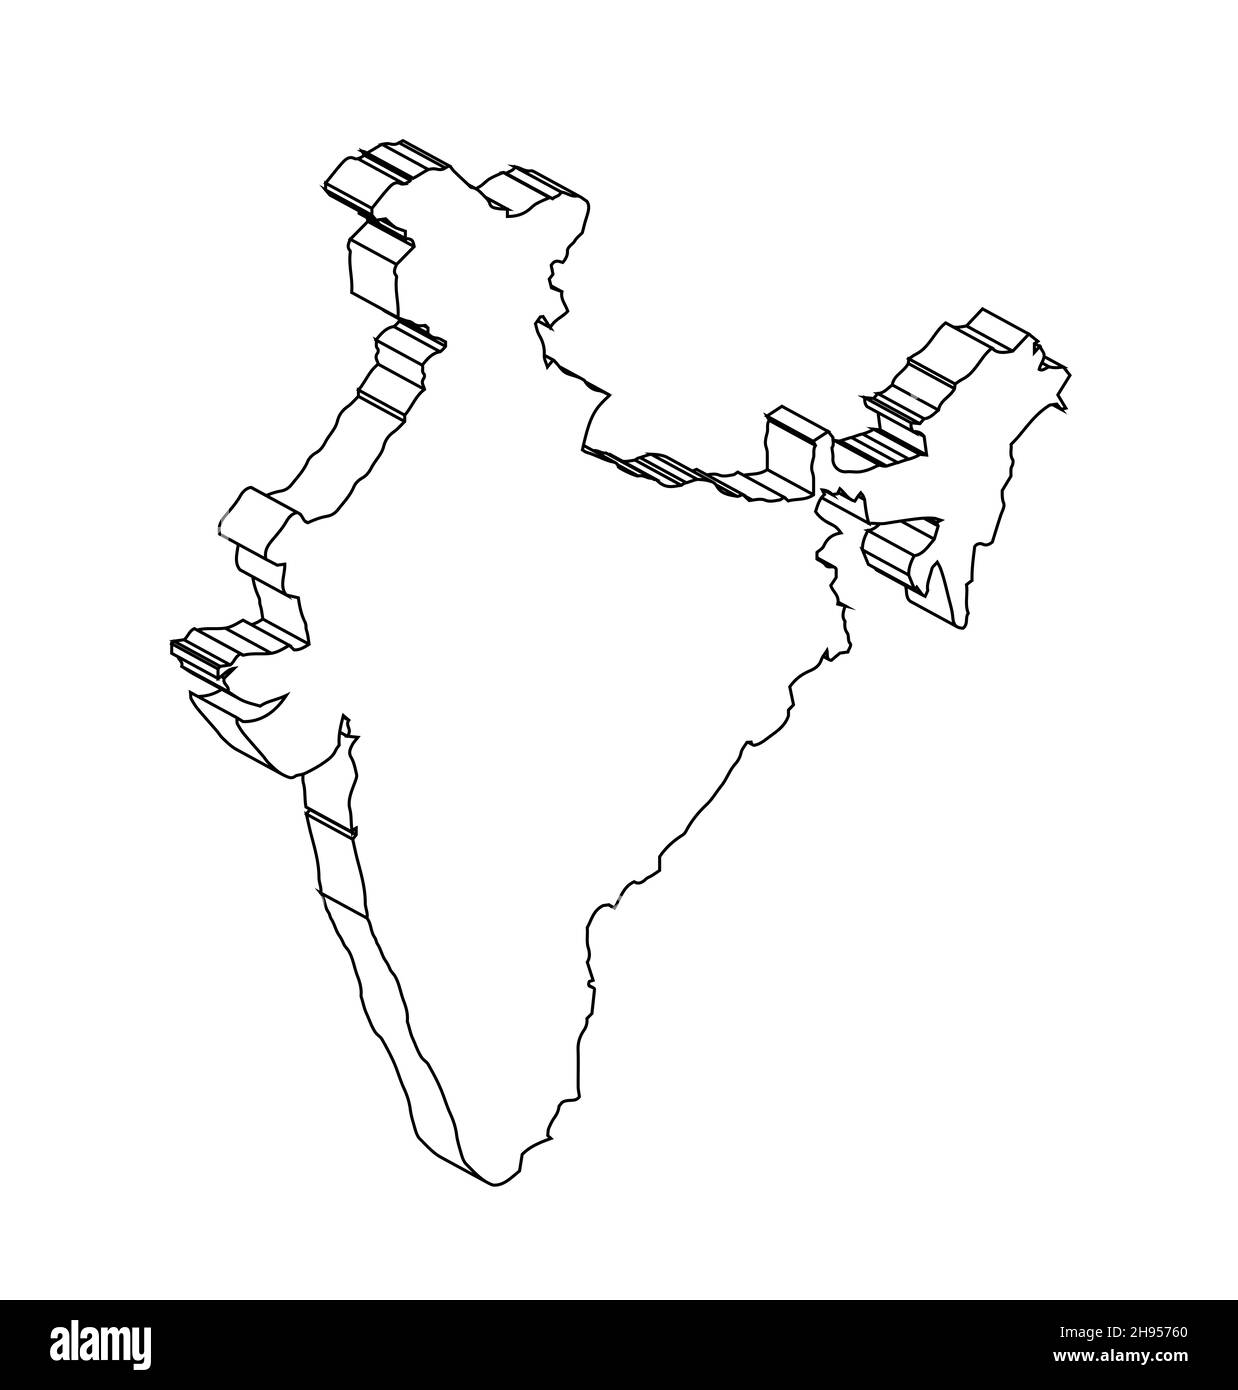 Outline map of india Black and White Stock Photos & Images - Alamy